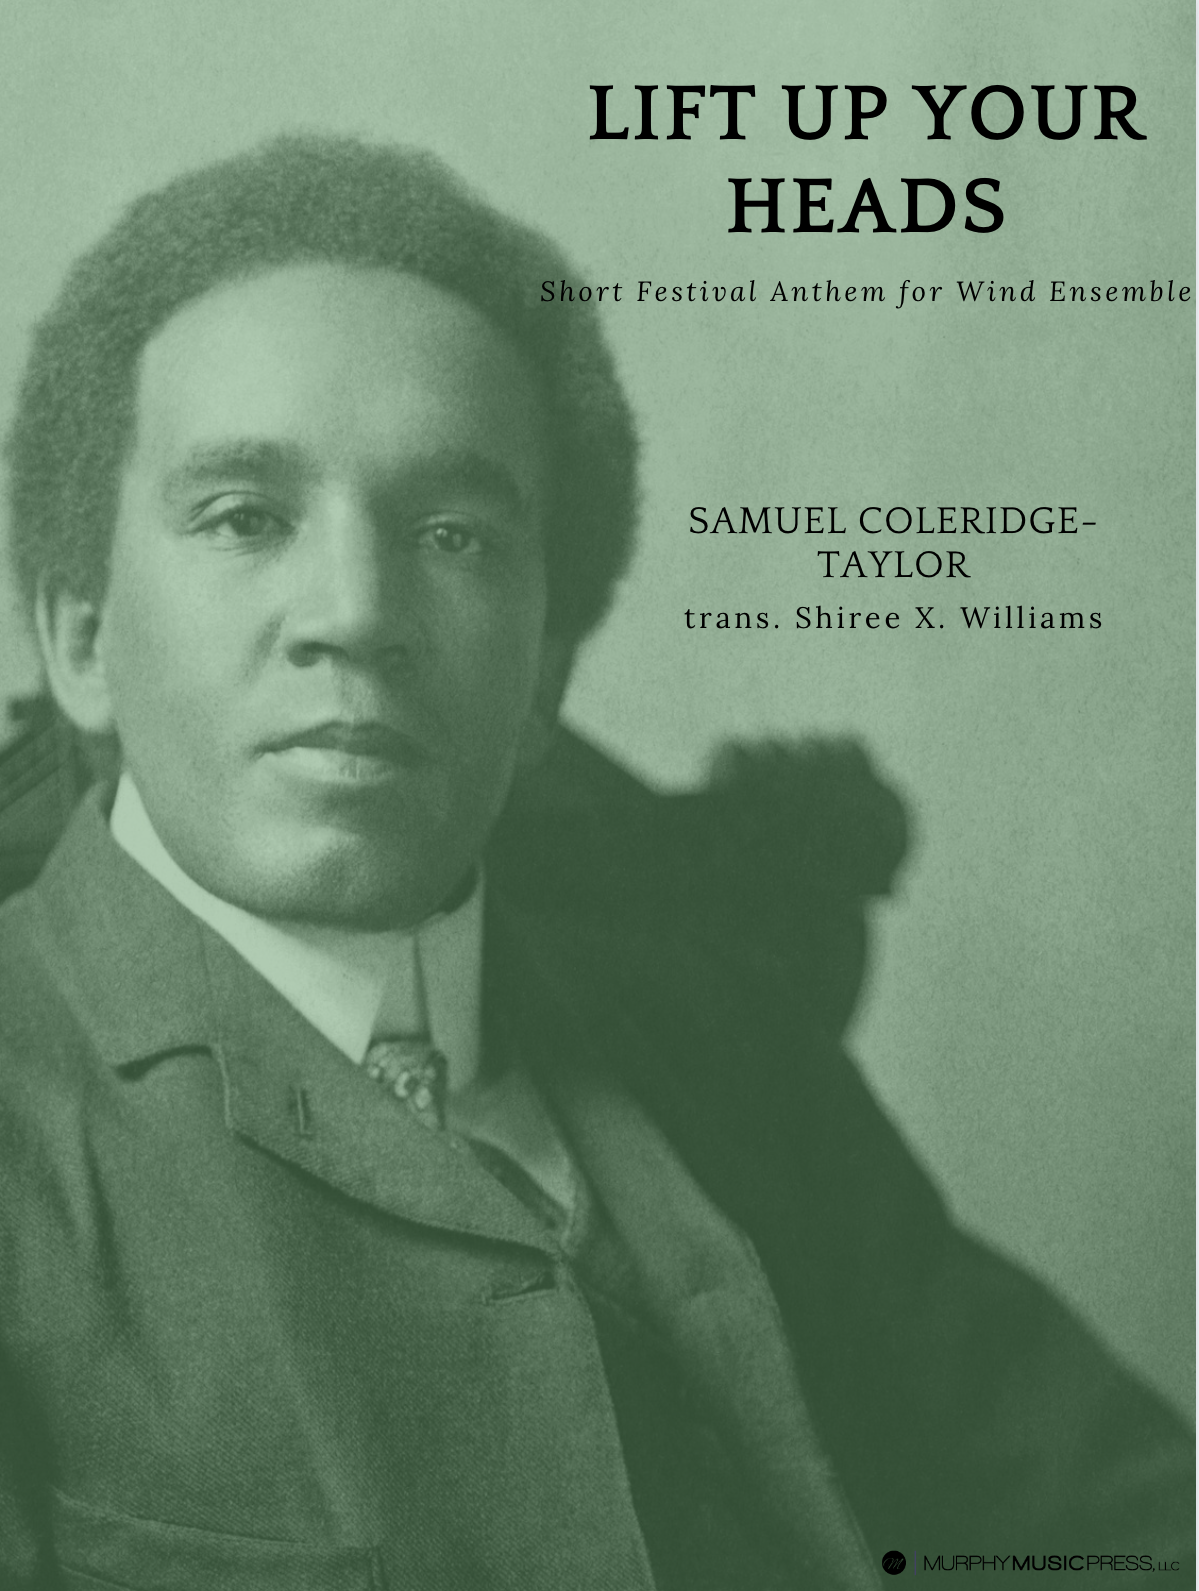 Lift Up Your Heads (Score Only) by Samuel Coleridge-Taylor, arr. Shiree X. Williams